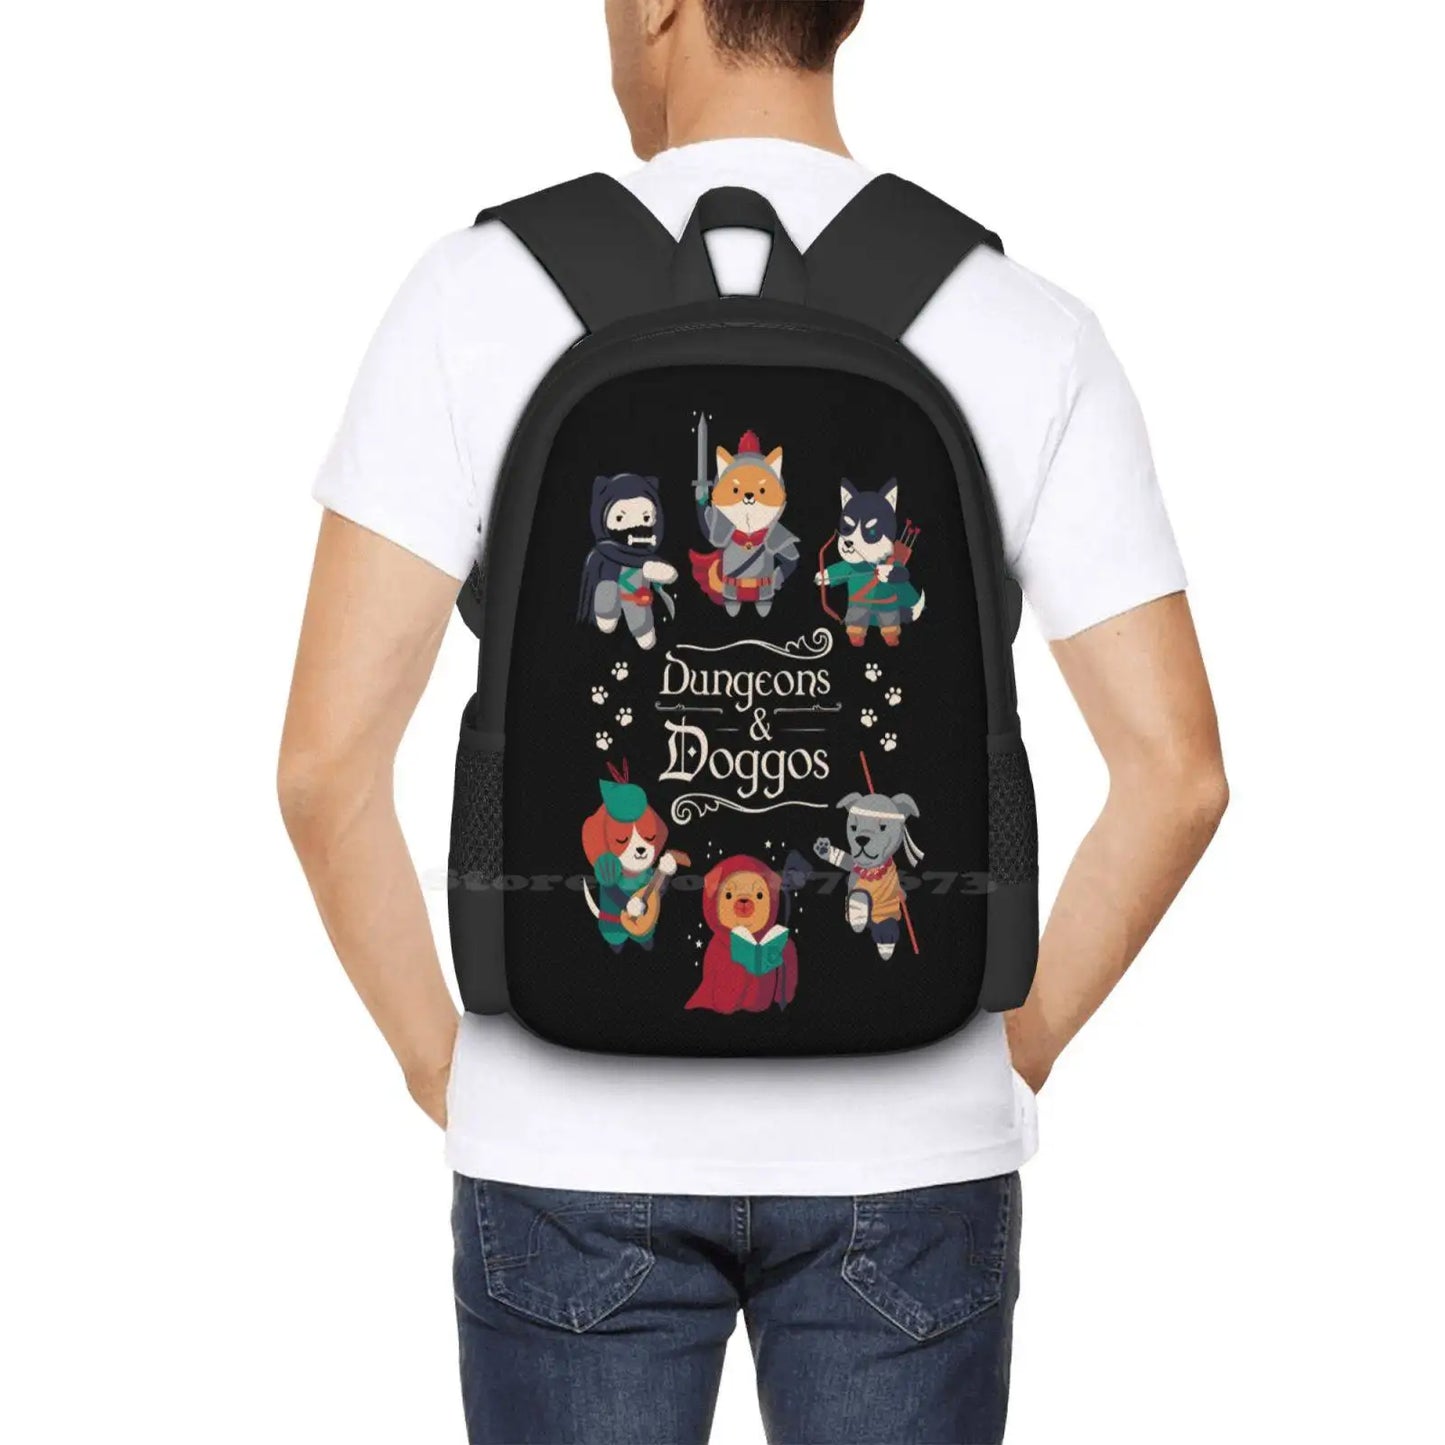 And Doggos Fashion Pattern Design Travel Laptop School Backpack Bag And Dragons D20 Where Master D And D Rpg Role Playing Game